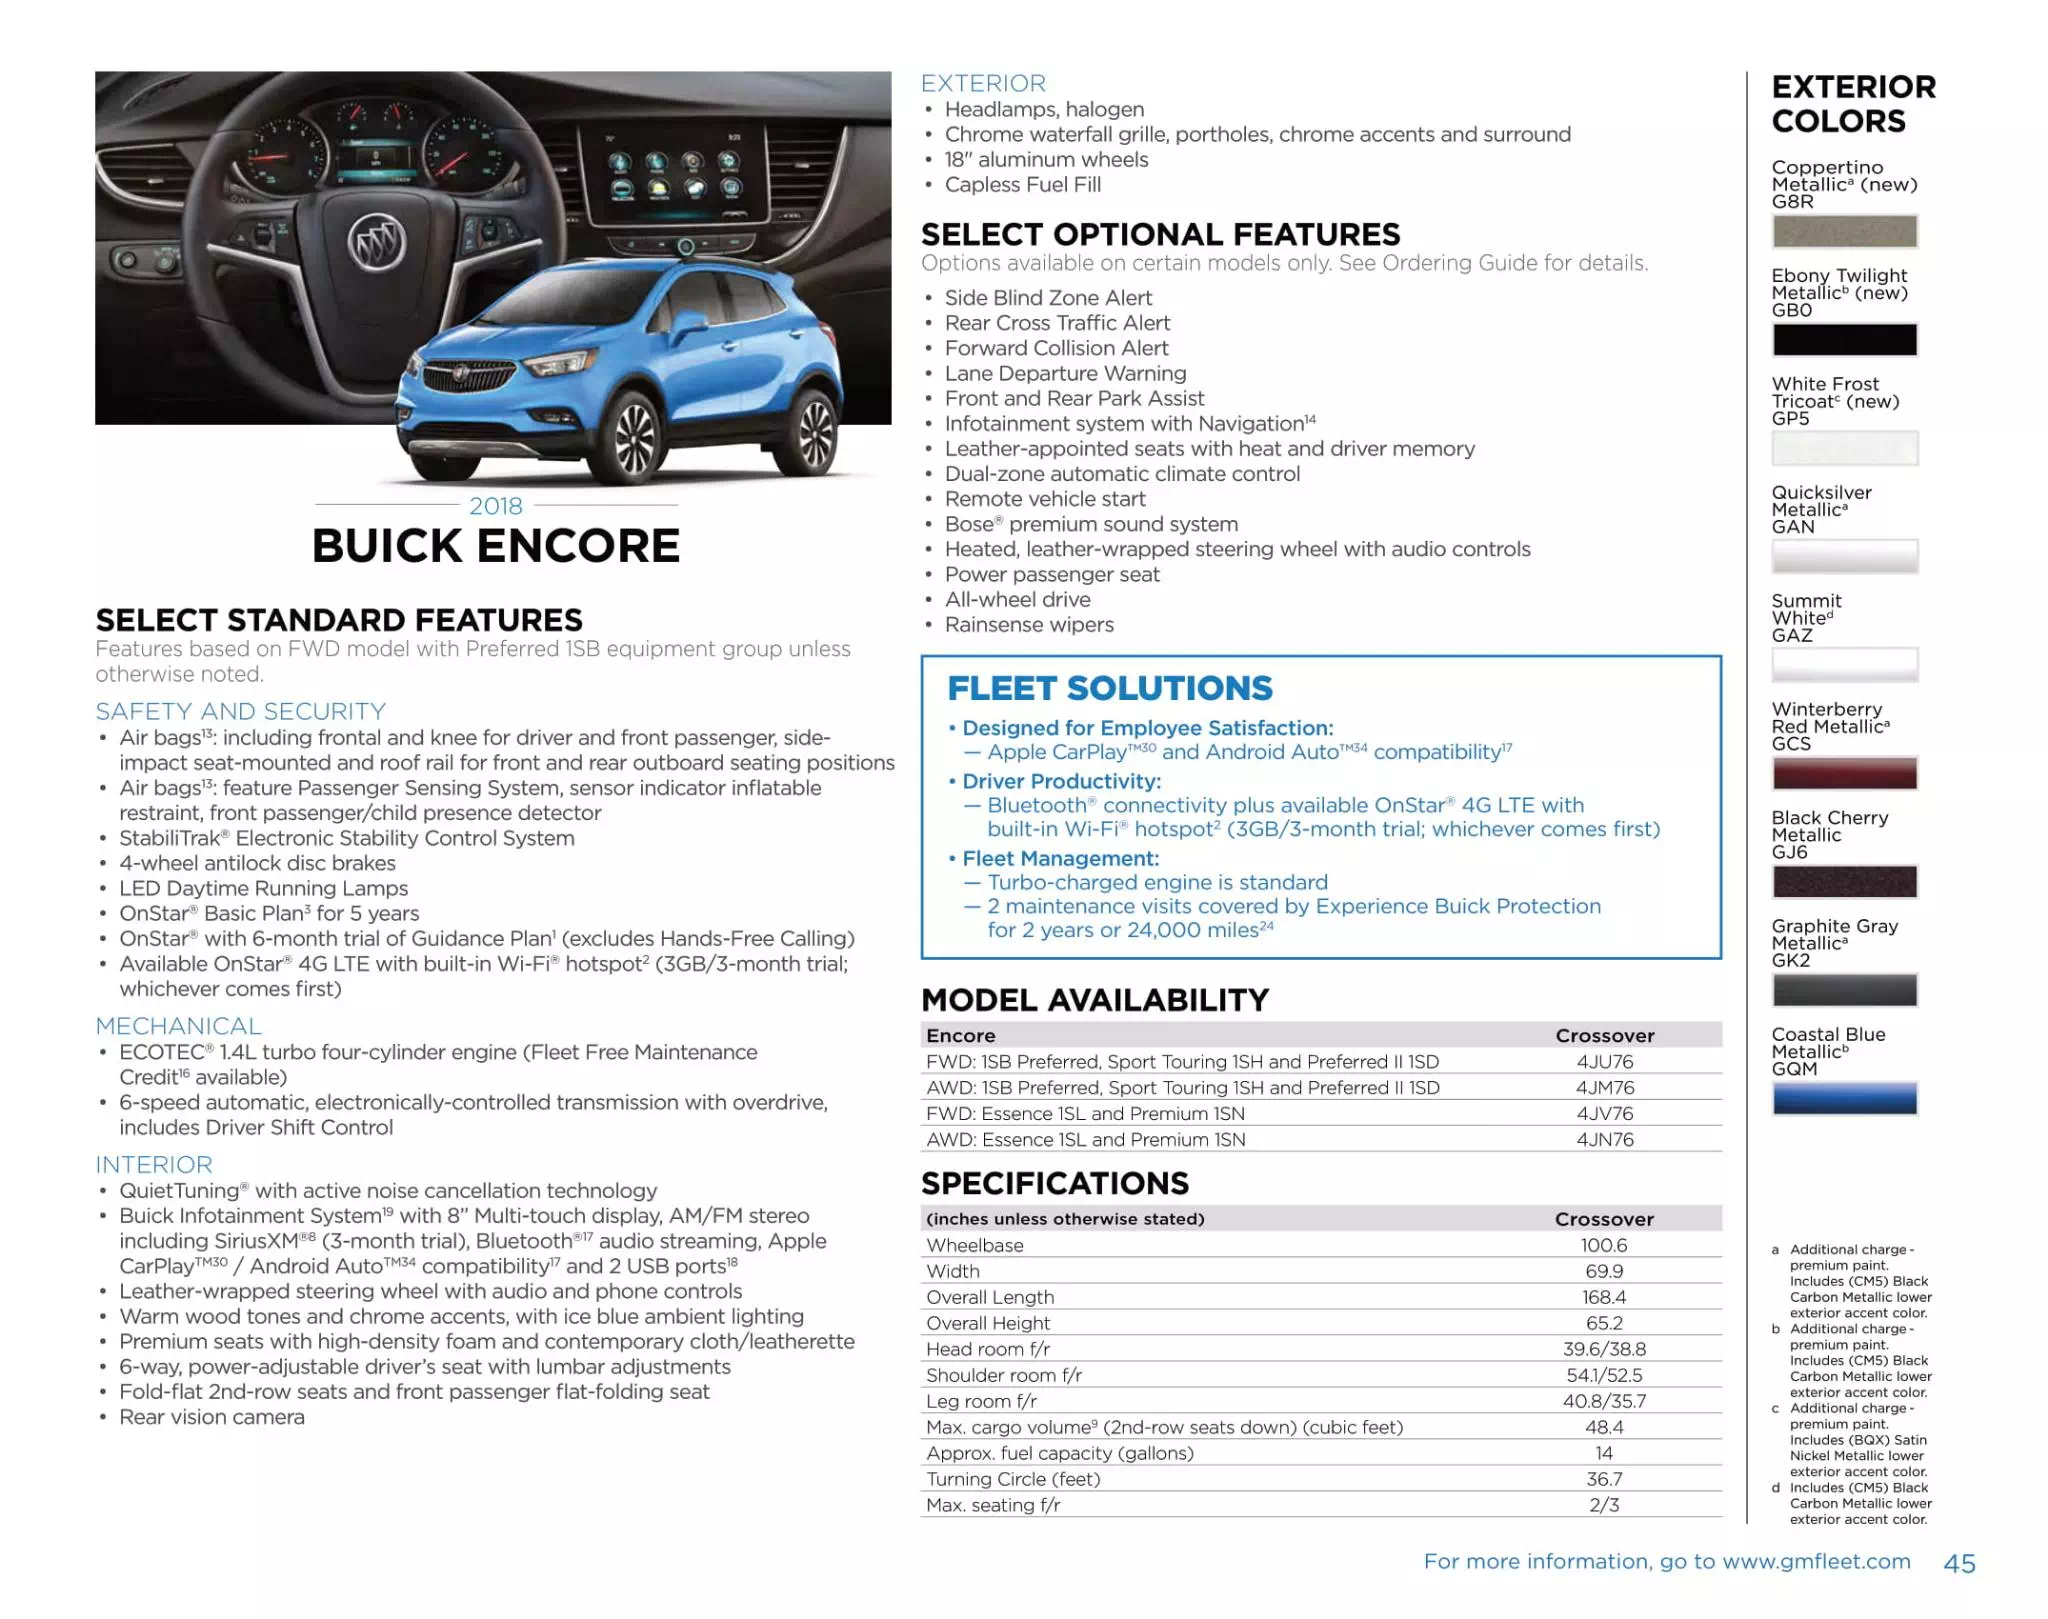 General Motors Sell sheet for Buick Encore Models, and Color Codes in 2018